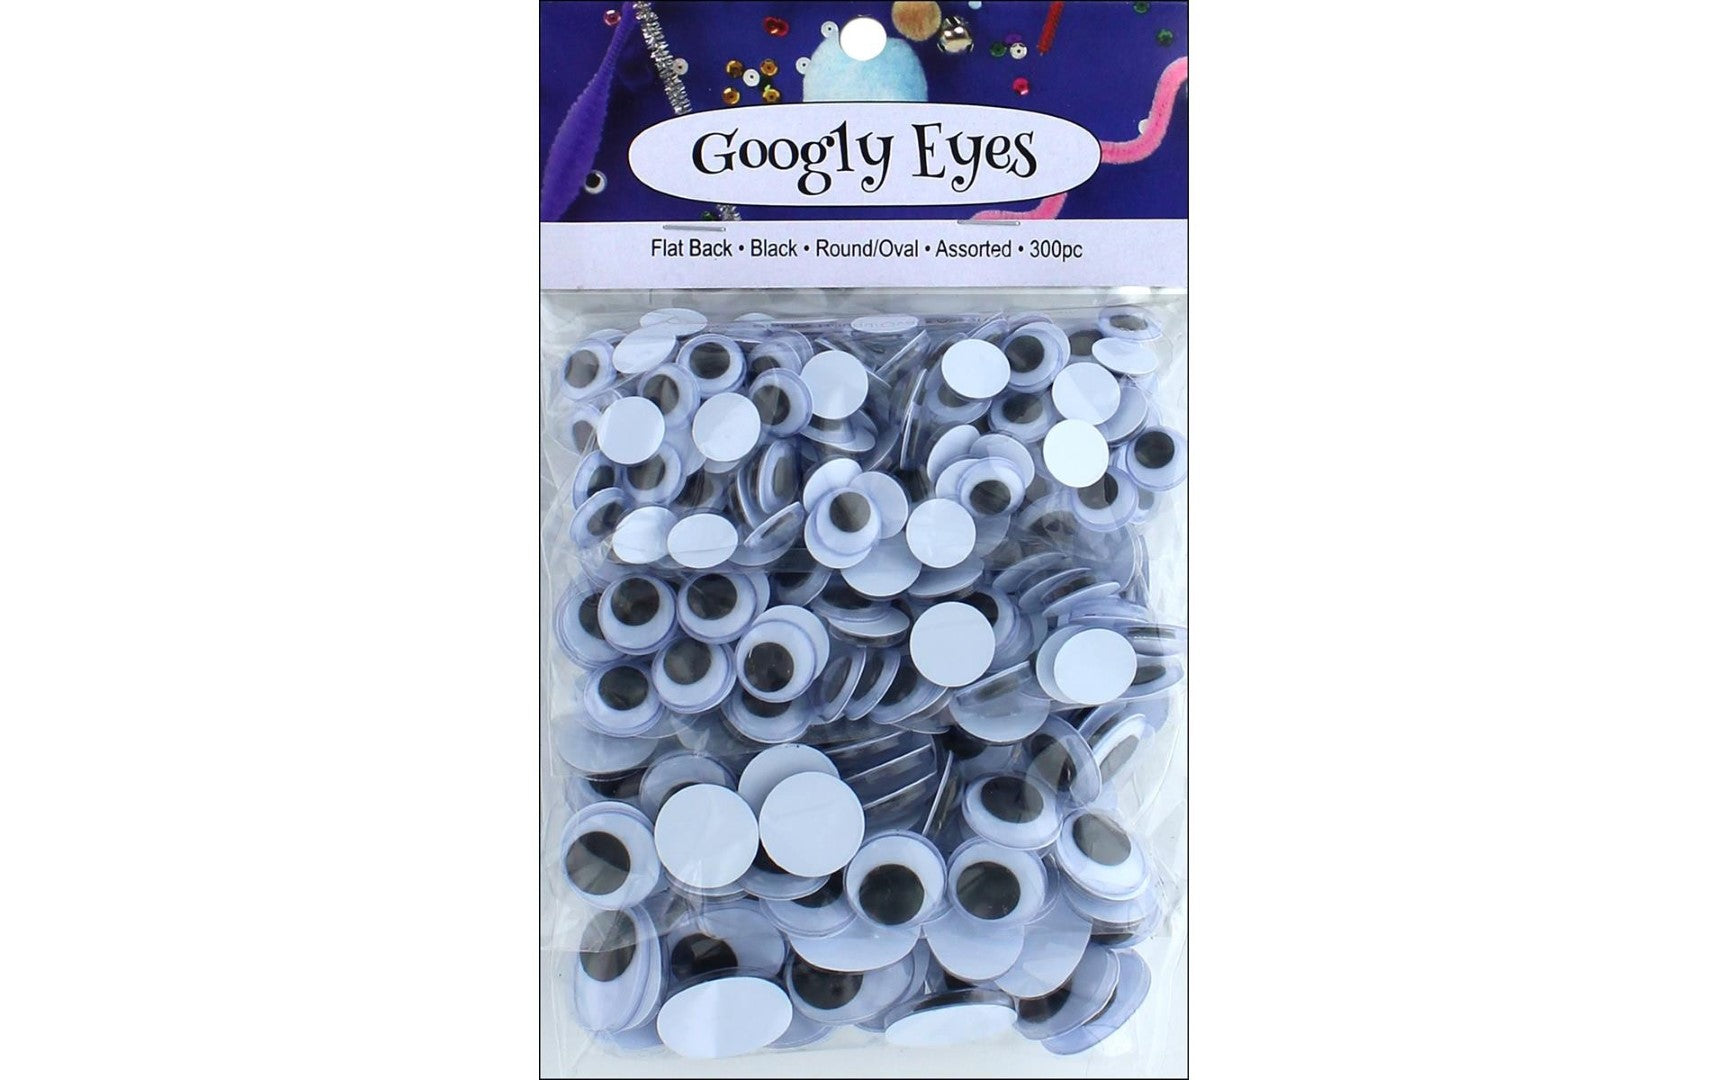 200 Pieces 20mm Black Plastic Wiggle Googly Eyes with Self